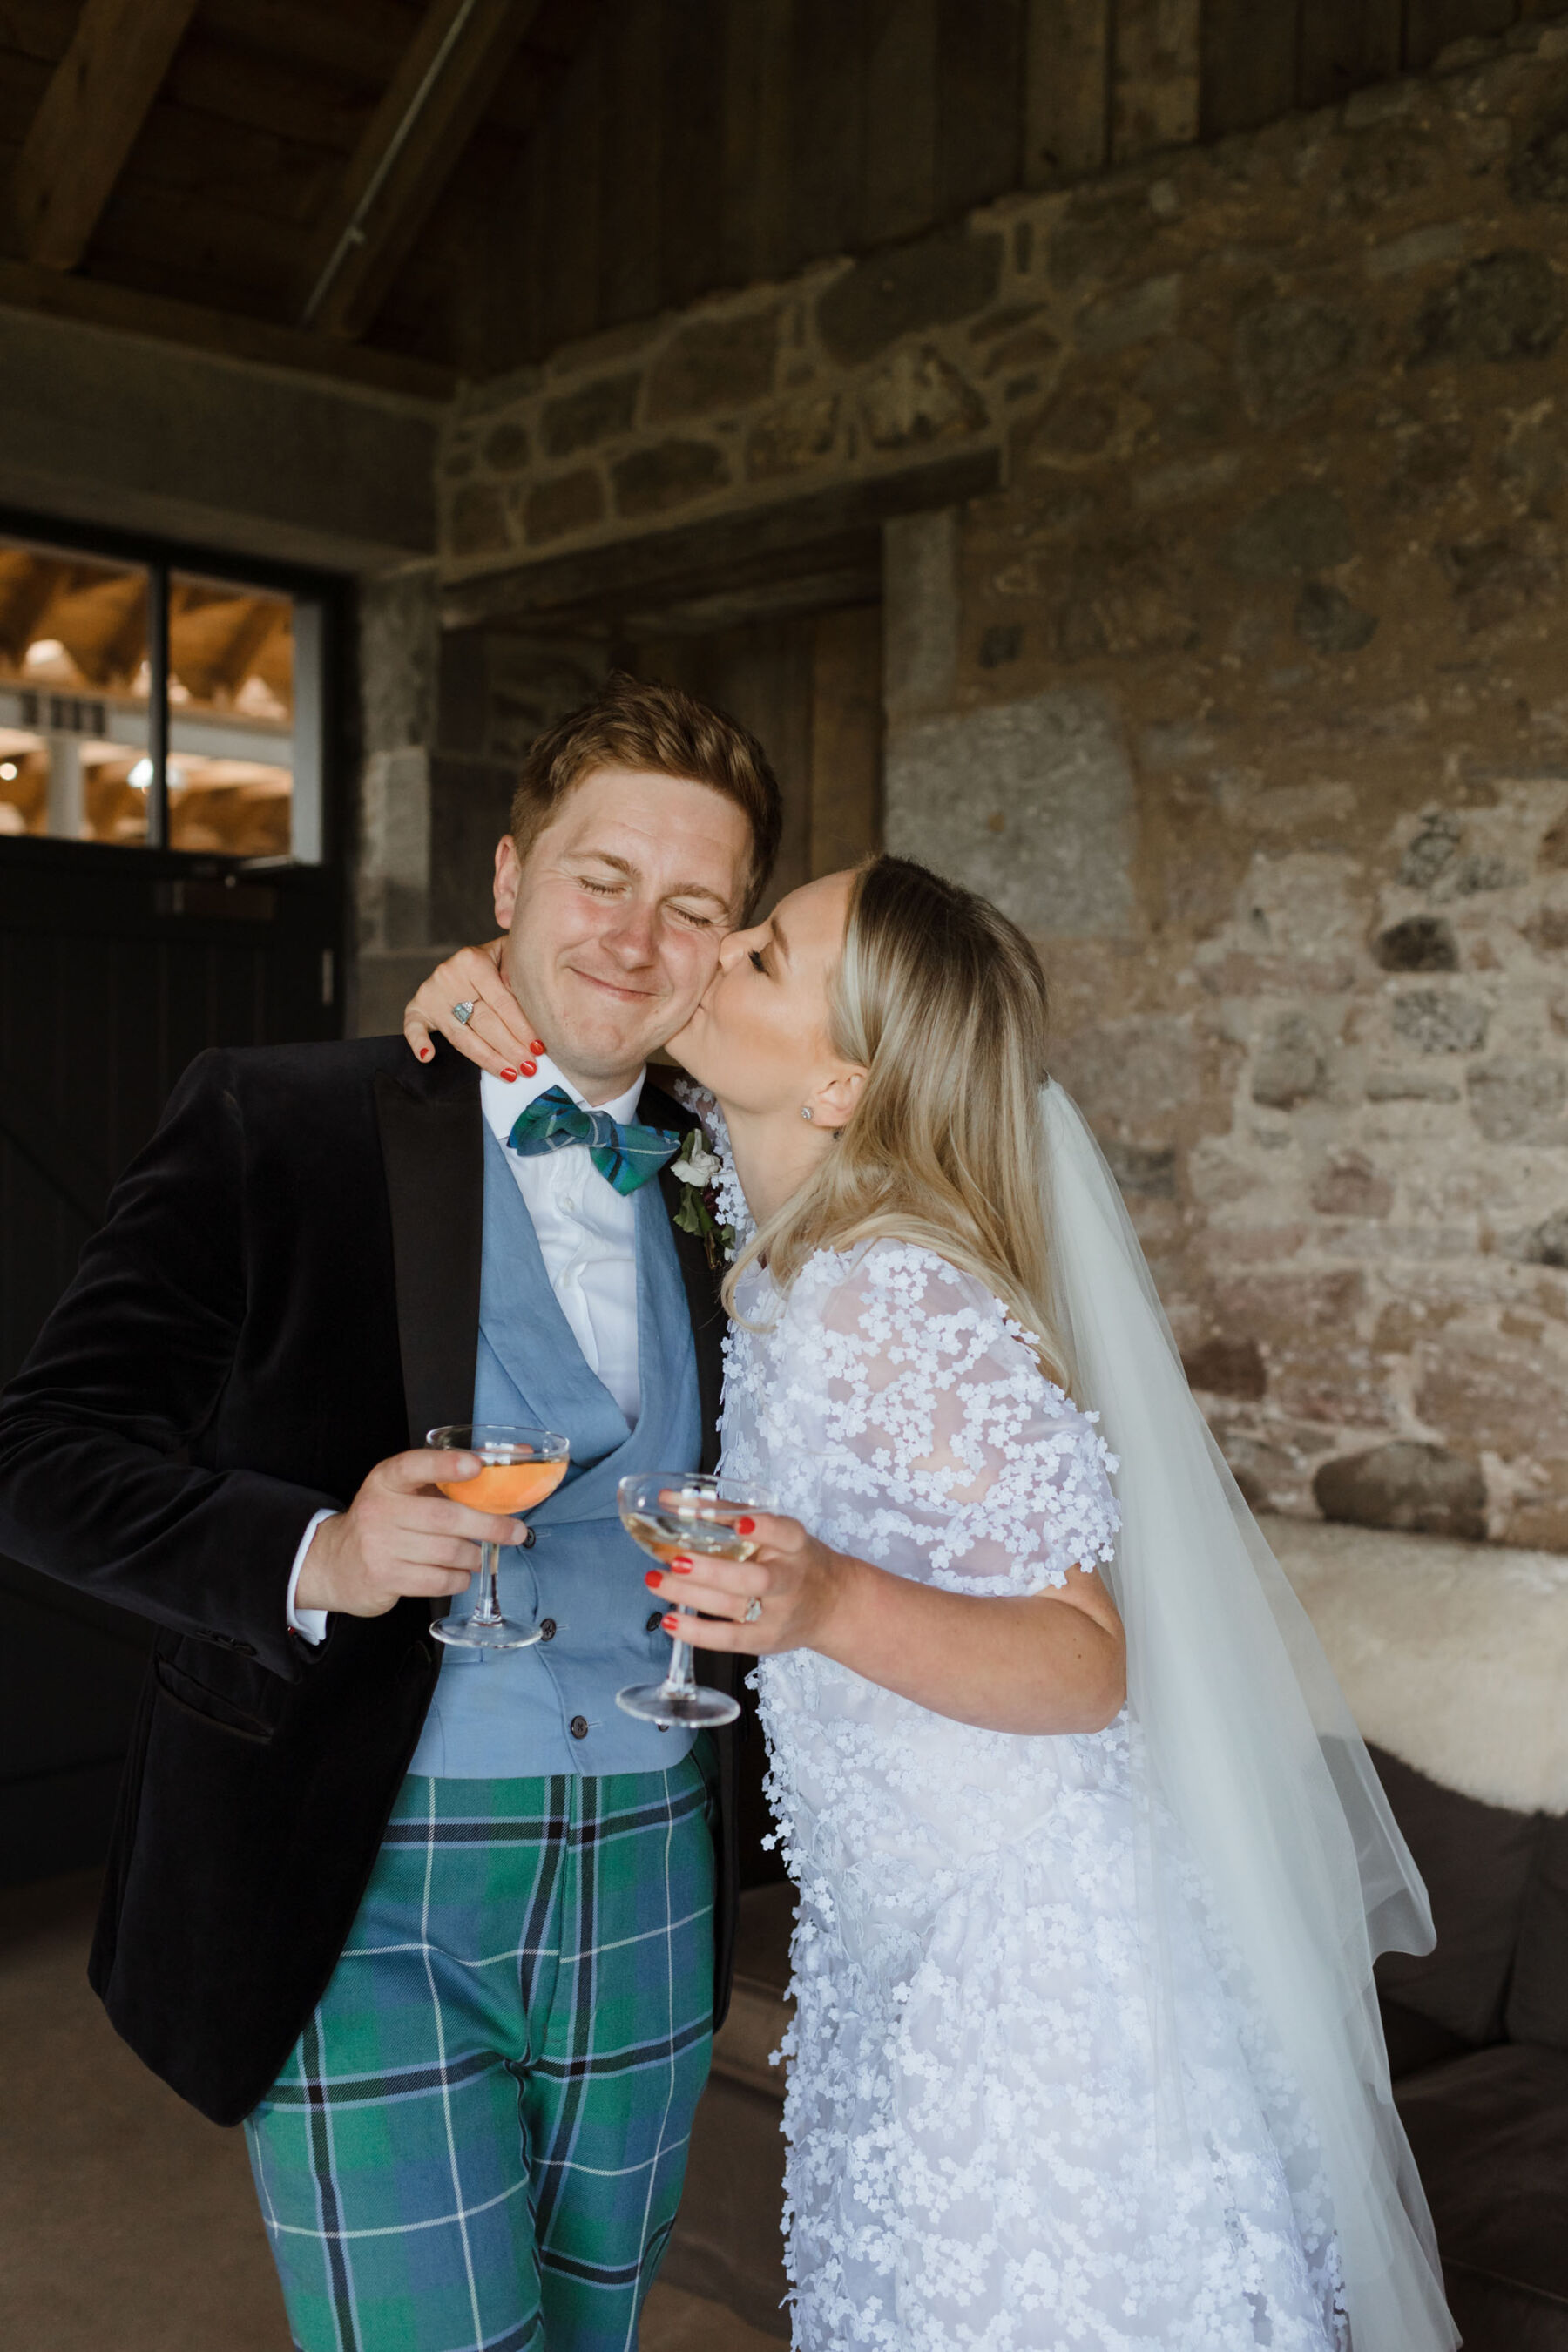 Groom in tartan trousers & bride in Cecilie Bahnsen wedding dress. Caro Weiss Photography.